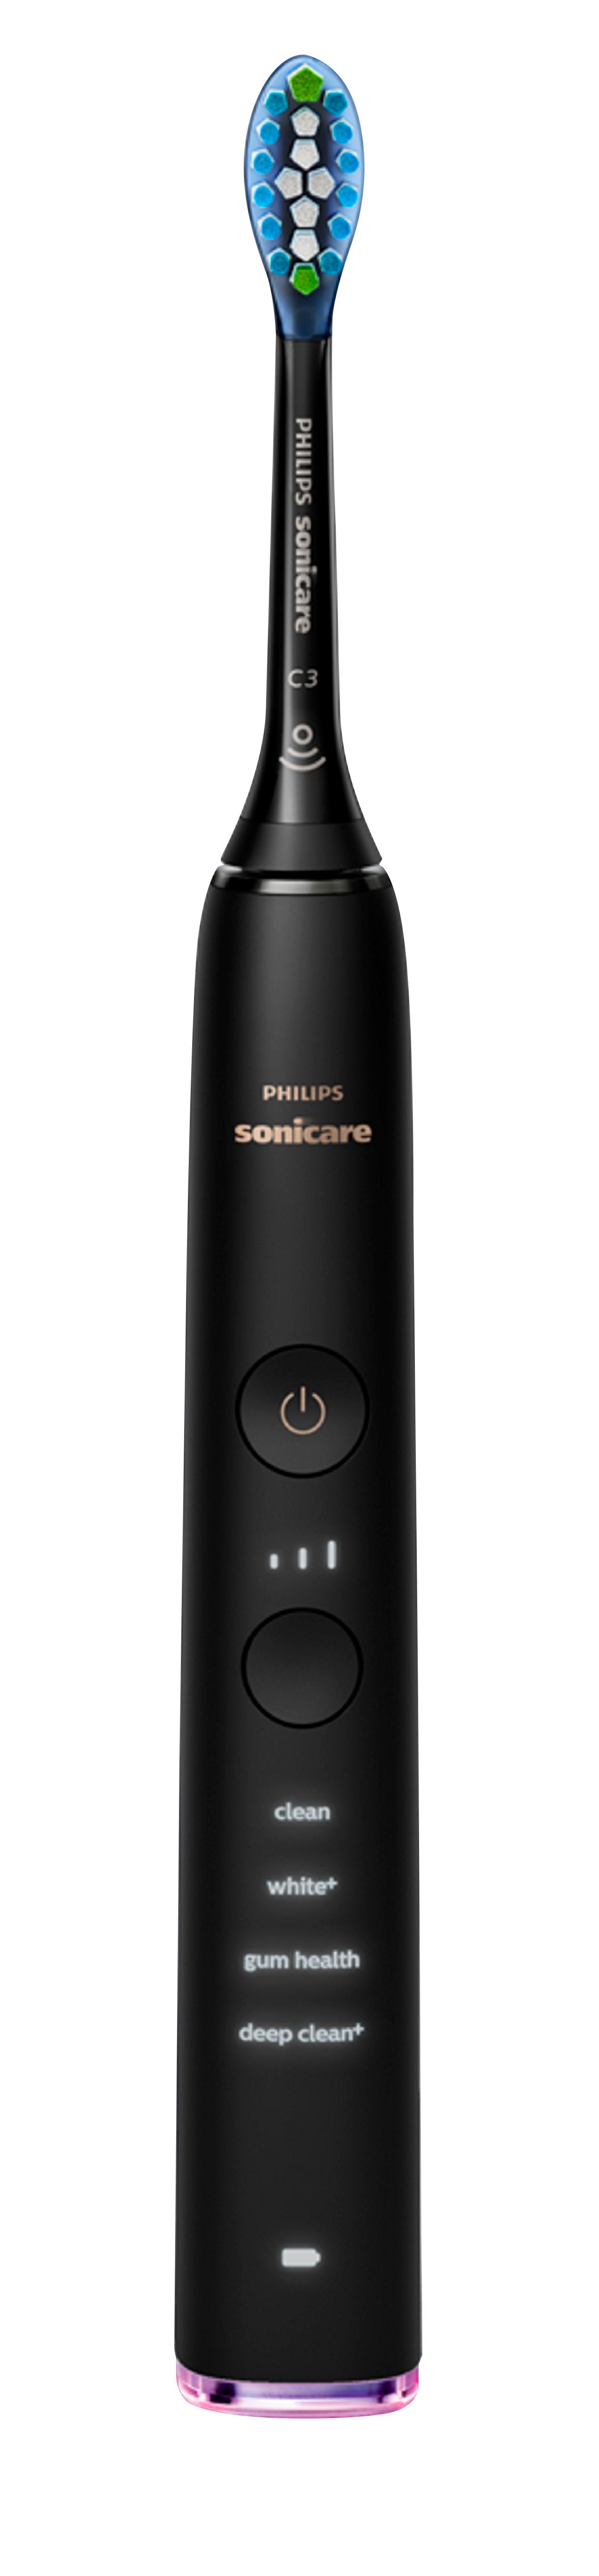 Philips Sonicare DiamondClean Smart 9300 Rechargeable Toothbrush Black - Best Buy